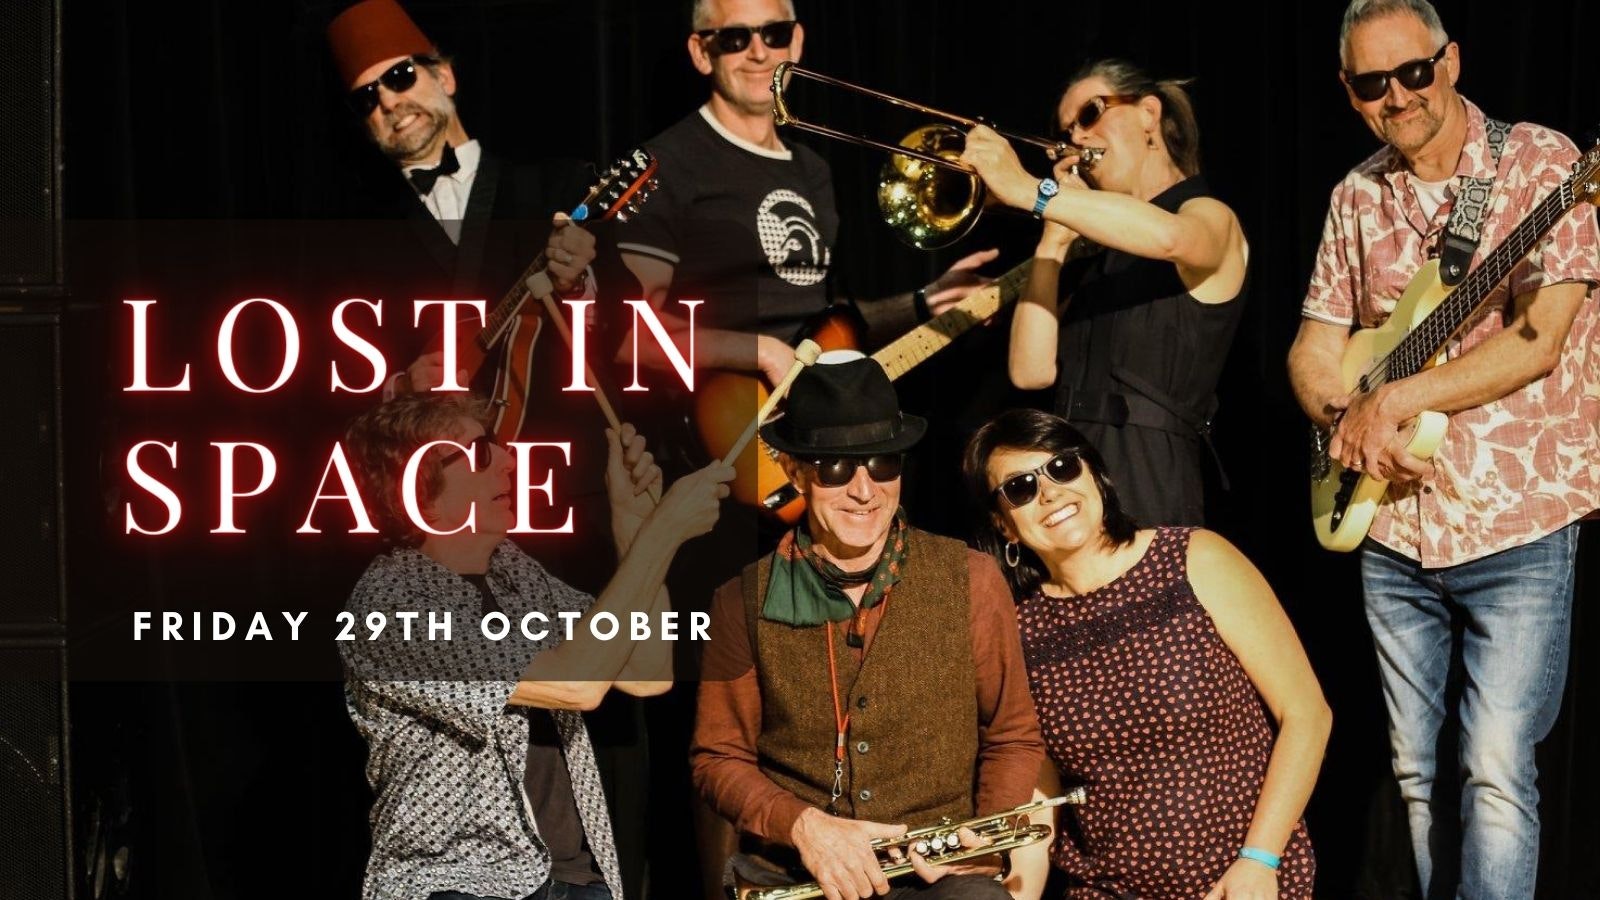 LOST IN SPACE | Plymouth, Annabel’s Cabaret & Discotheque